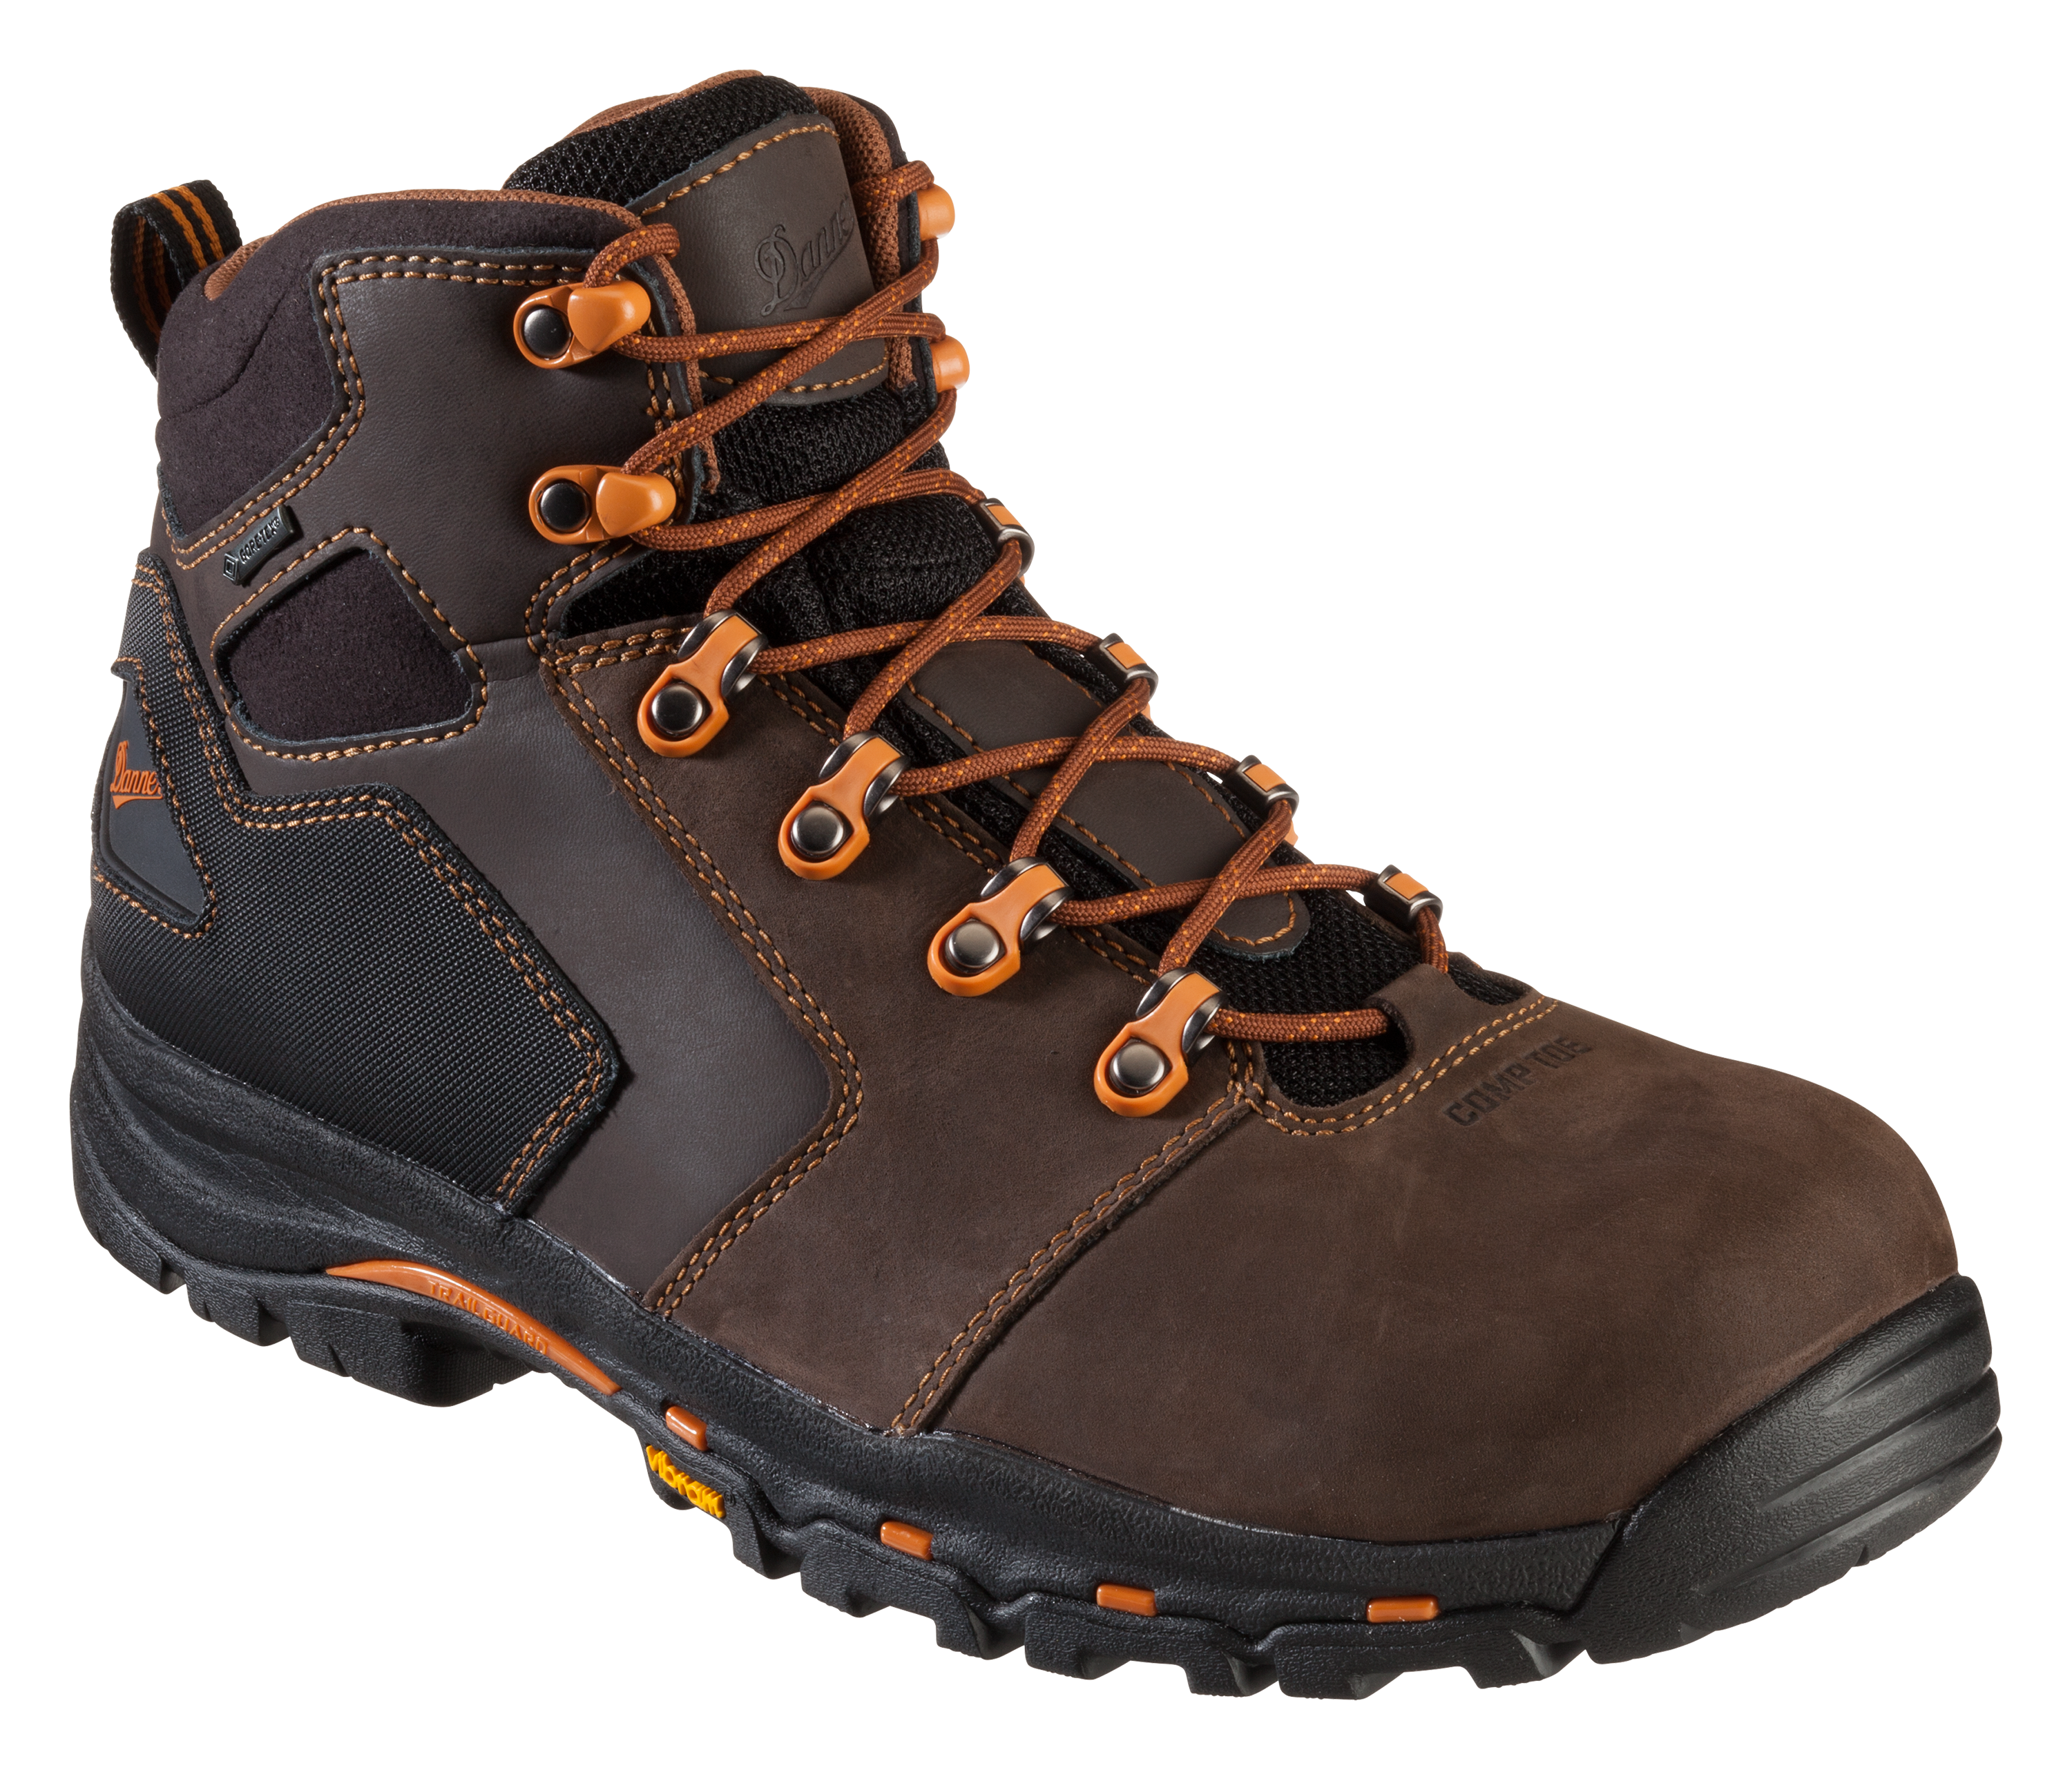 Danner Vicious GORE-TEX Non-Metallic Safety Toe Work Boots for Men - Brown - 11M